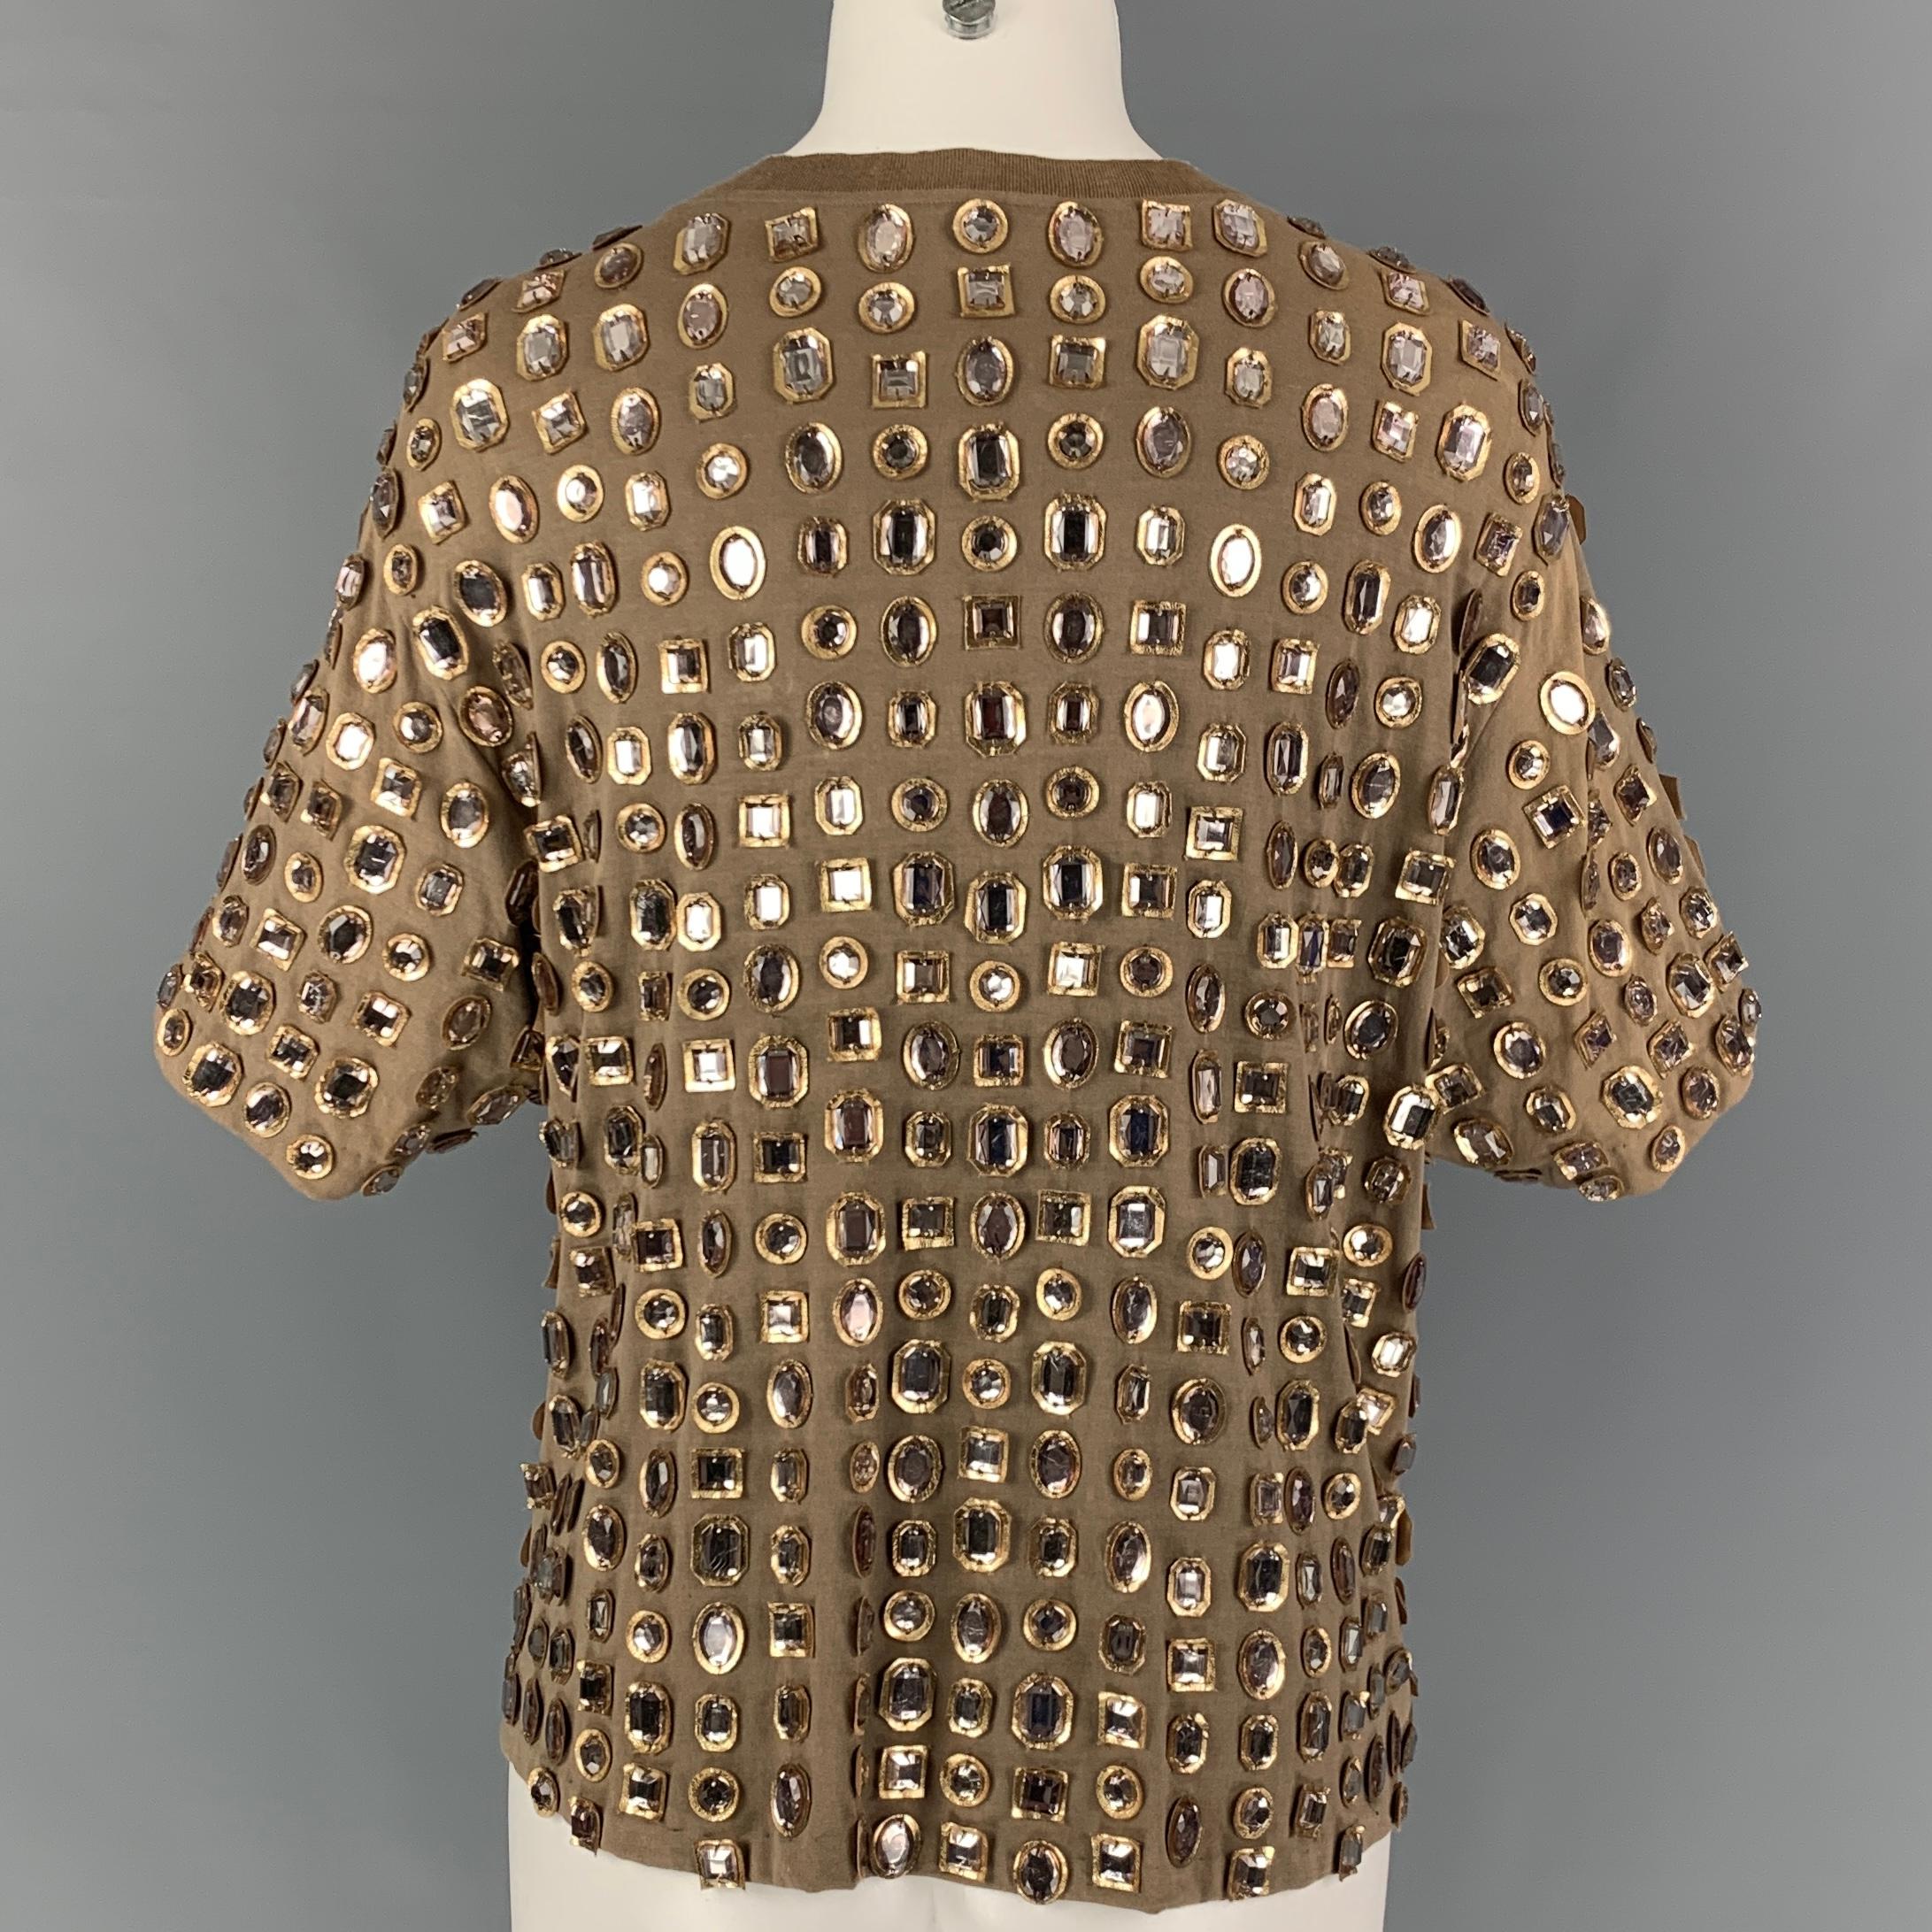 GIVENCHY top comes in a taupe material featuring gold leather details, rhinestone embellishments, and a crew-neck.

Very Good Pre-Owned Condition. Fabric tag removed.
Marked: M

Measurements:

Shoulder: 19 in.
Bust: 40 in.
Sleeve: 9.5 in.
Length: 21